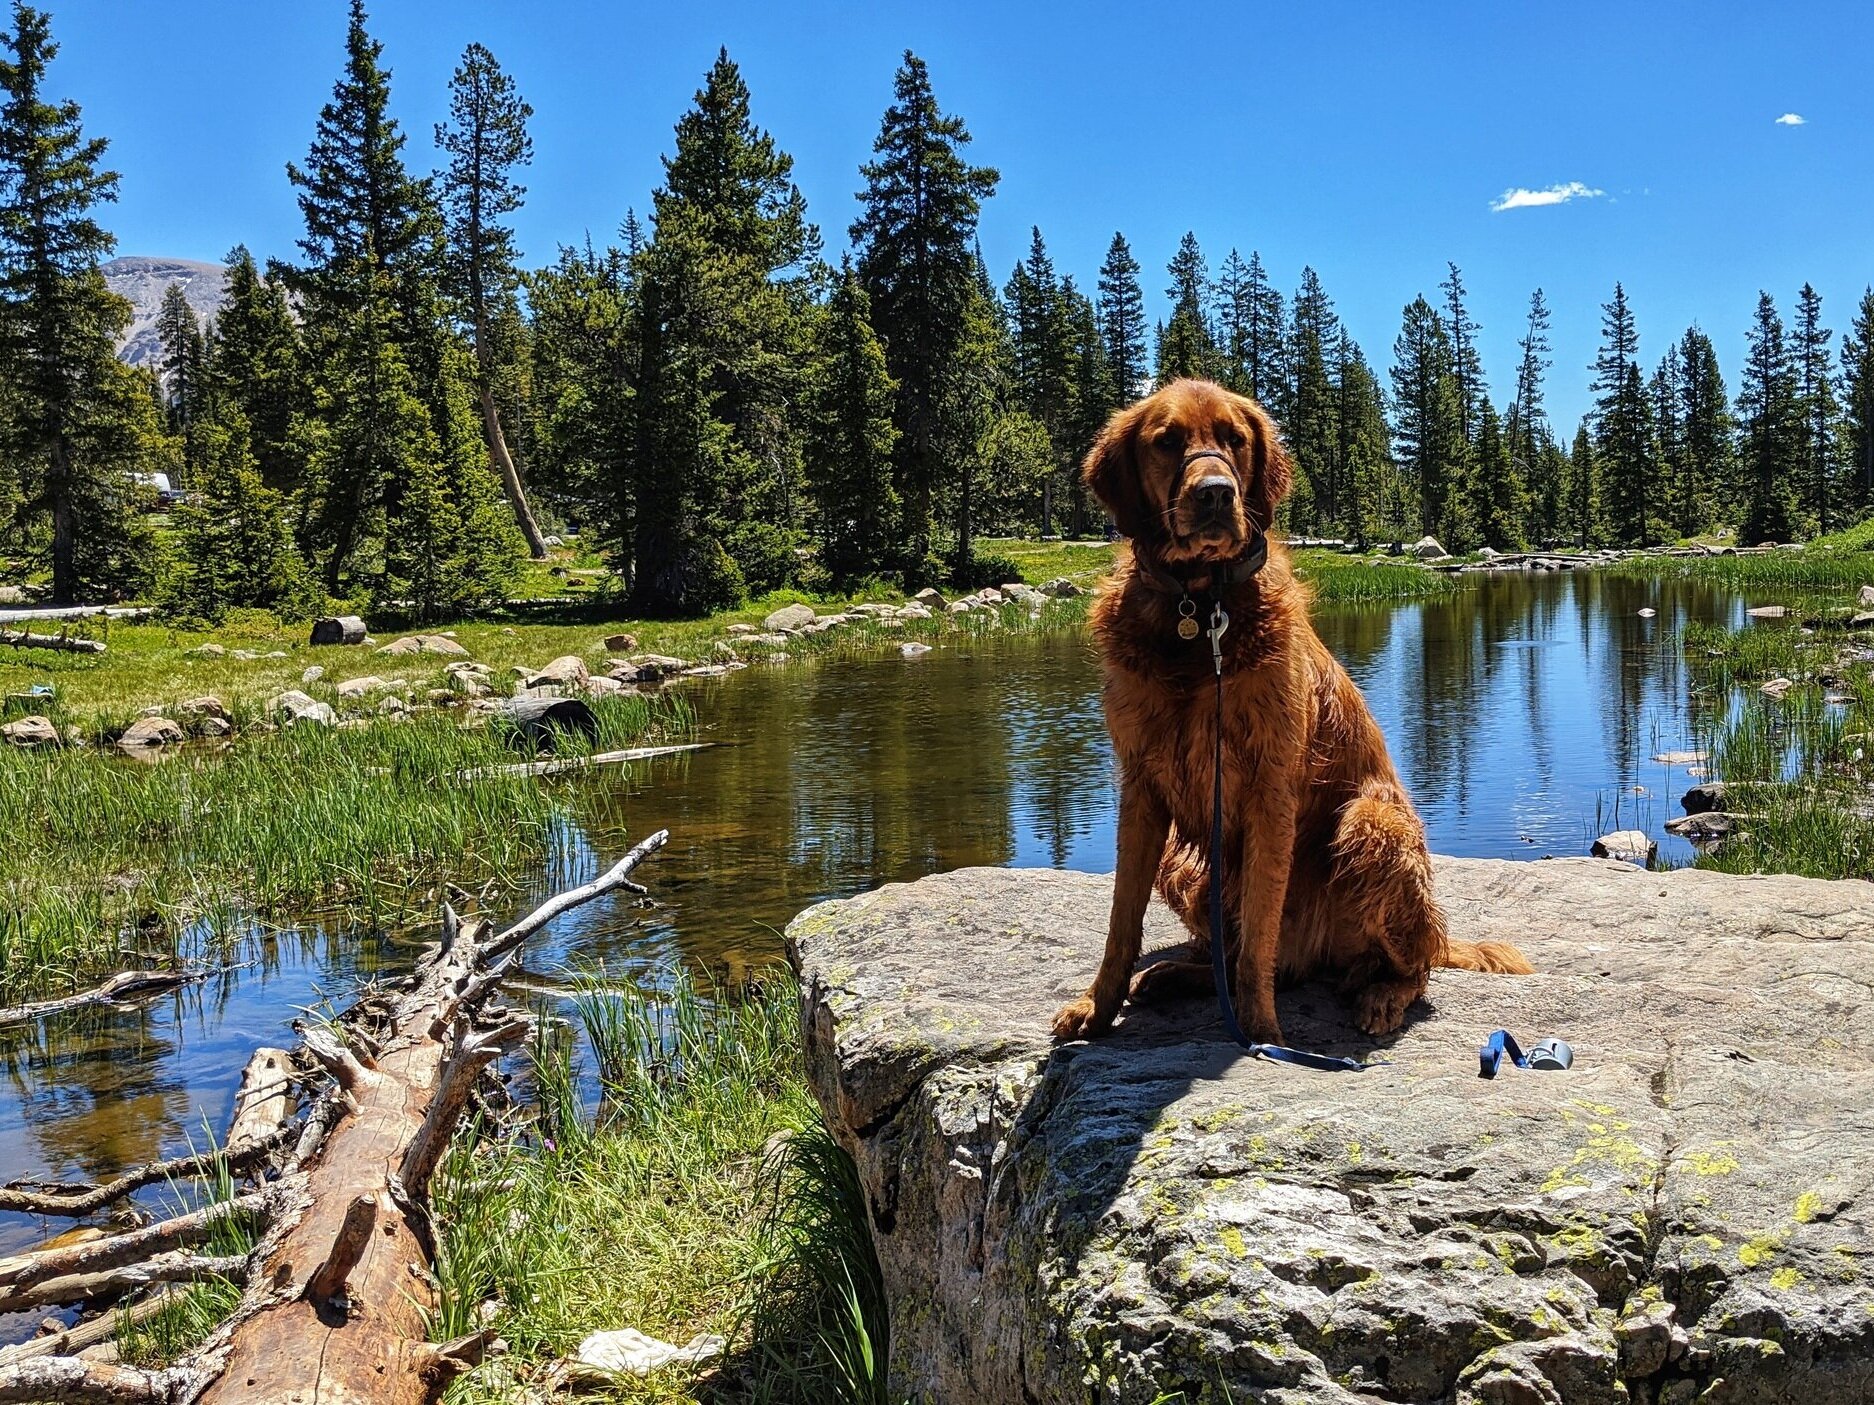 Scout sits on a large boulder that juts into a crystal clear creek surrounded by pines.